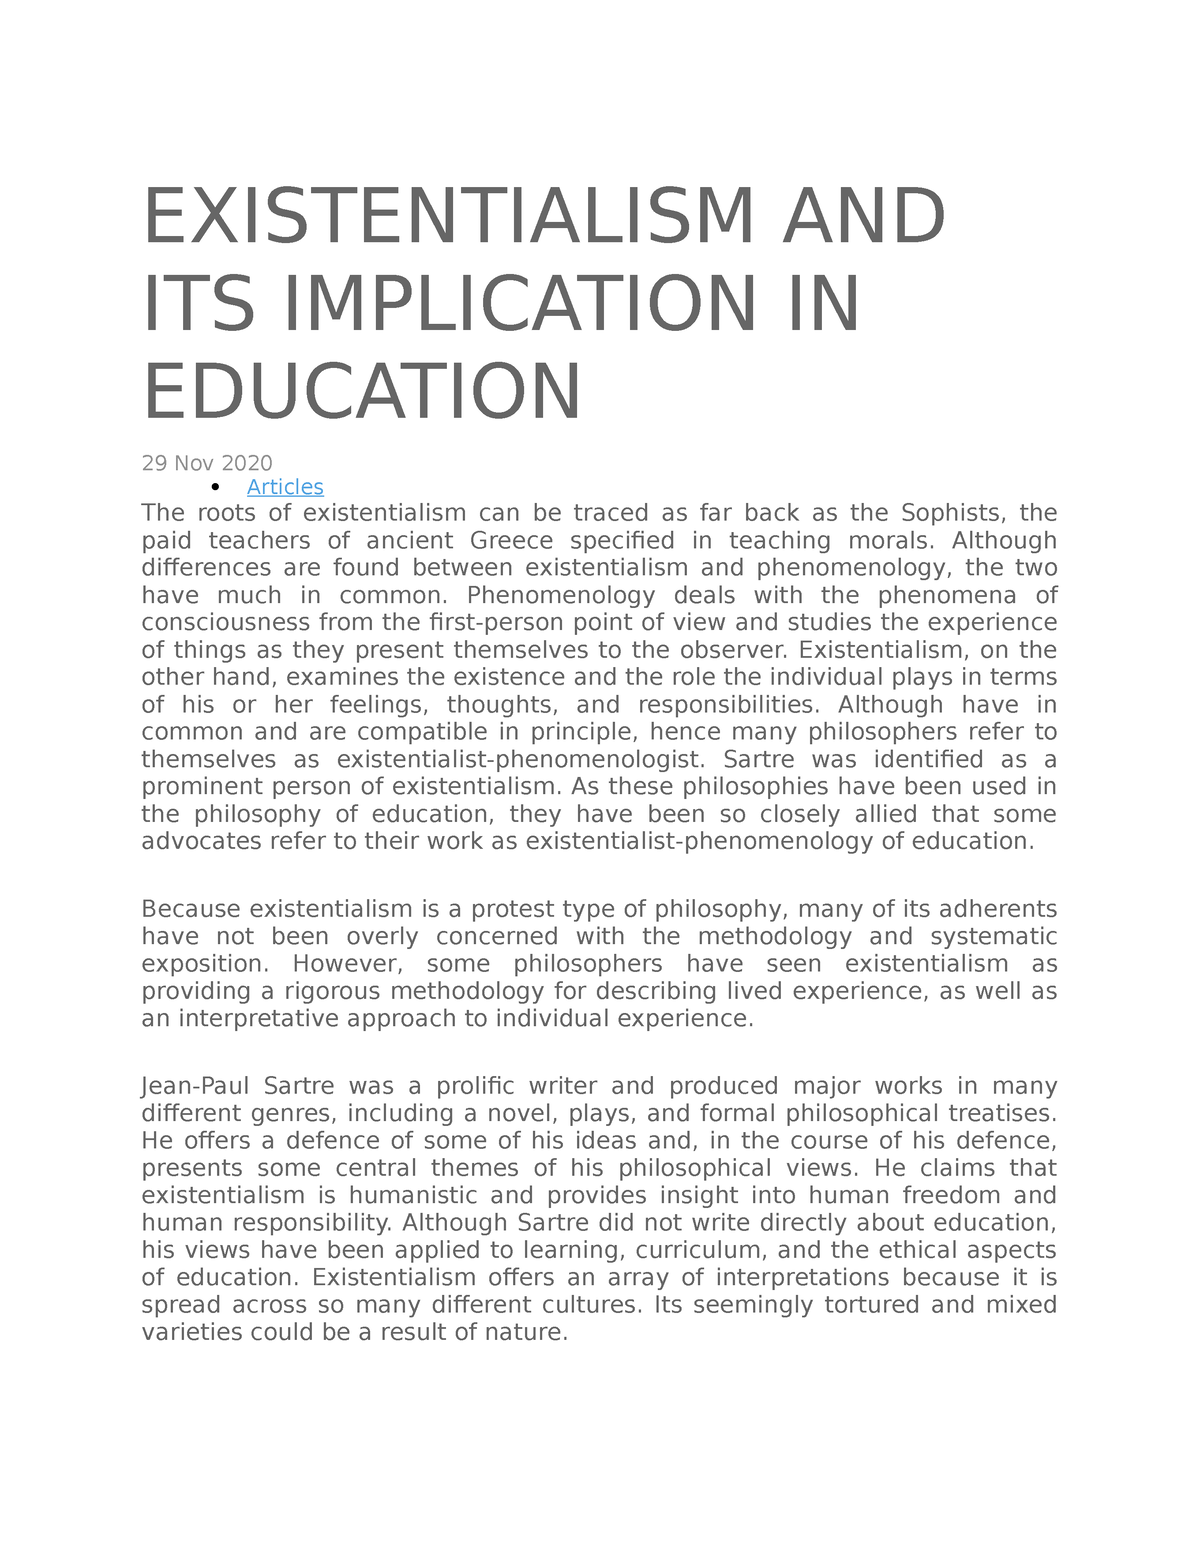 essays about existentialism